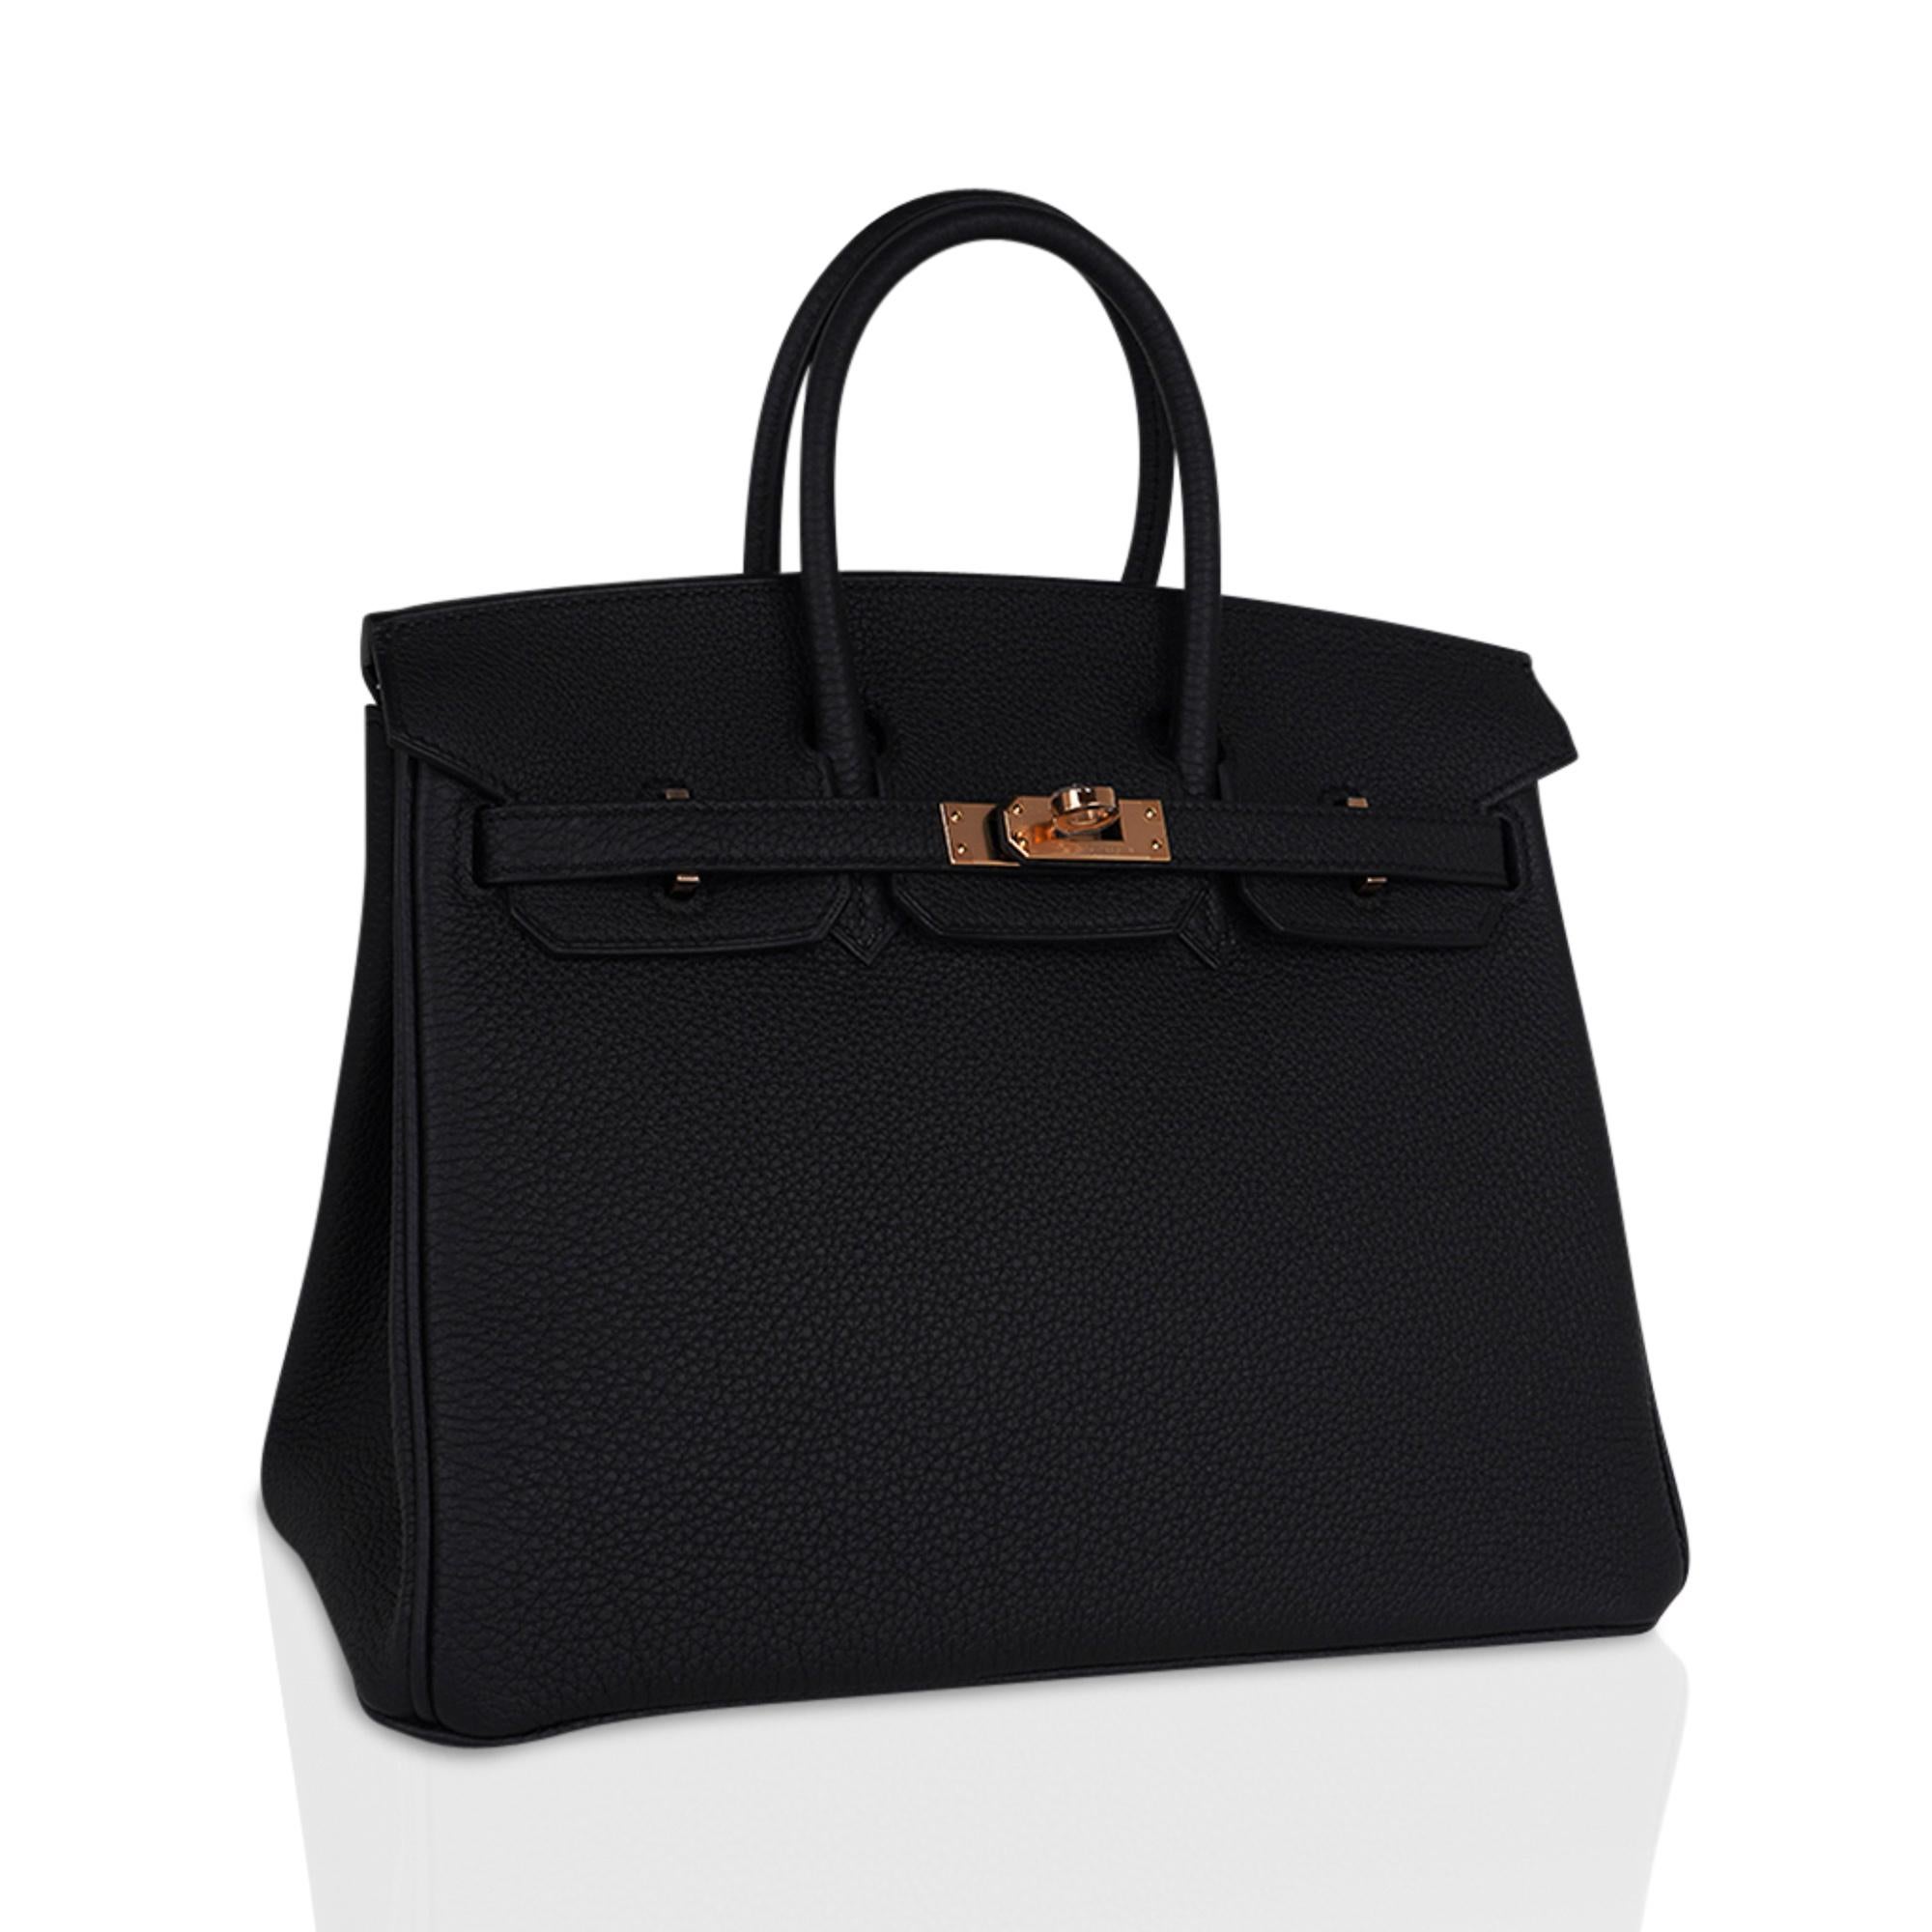 Mightychic offers a gorgeous Black Hermes Birkin 25 bag featured with the warm glow of Rose Gold hardware. 
This beautiful Birkin bag is a perfect combination to move from day to evening.
Togo leather is supple and scratch resistant/
Comes with the